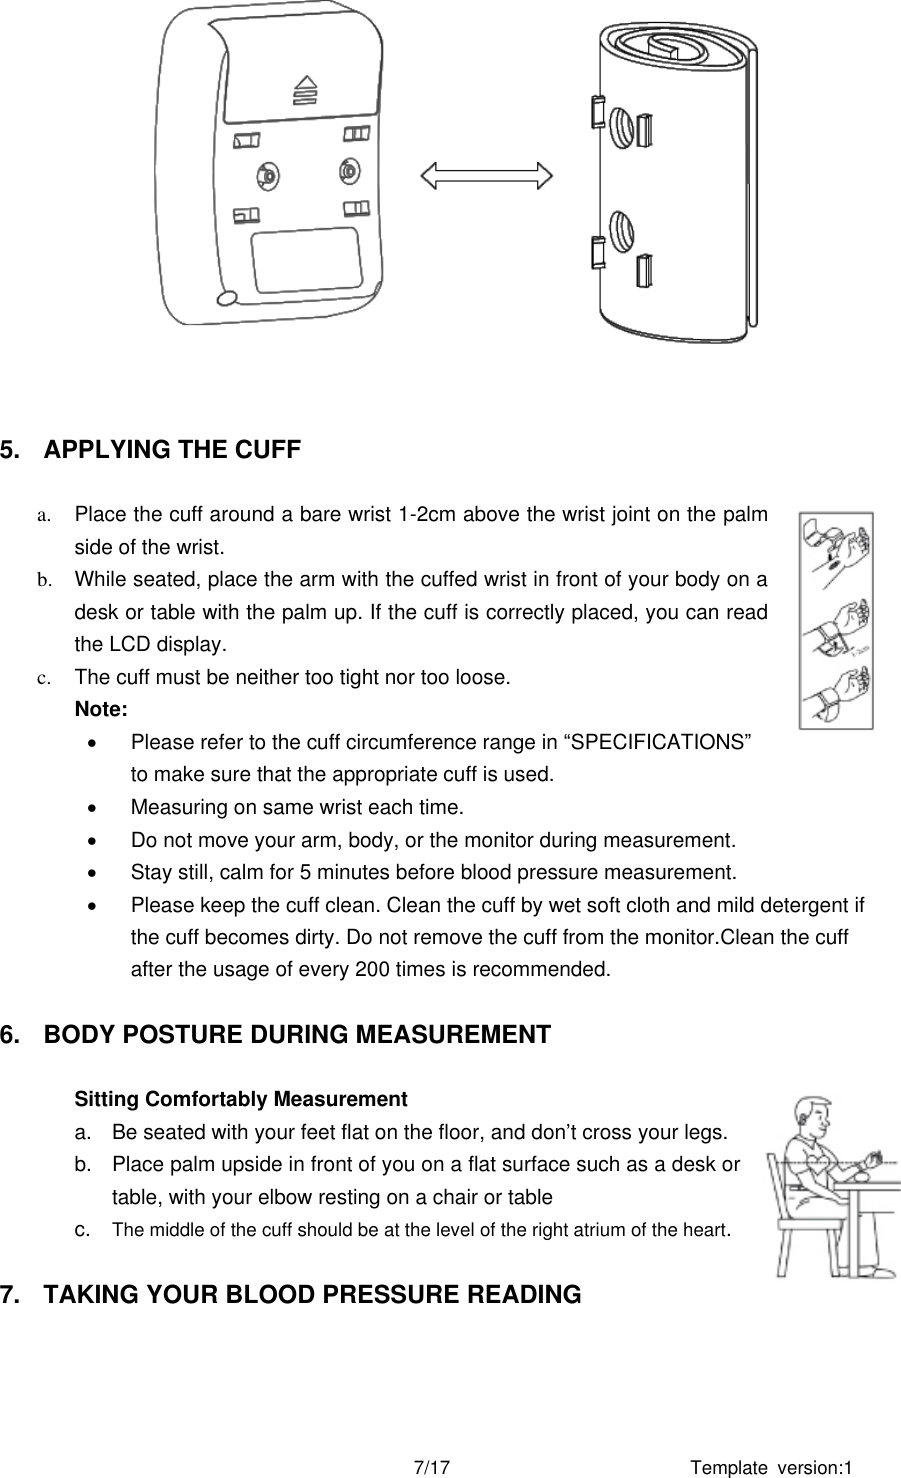 Template  version:1 7/17    5.  APPLYING THE CUFF  a.  Place the cuff around a bare wrist 1-2cm above the wrist joint on the palm side of the wrist.   b.  While seated, place the arm with the cuffed wrist in front of your body on a desk or table with the palm up. If the cuff is correctly placed, you can read the LCD display. c.  The cuff must be neither too tight nor too loose.   Note:     Please refer to the cuff circumference range in “SPECIFICATIONS” to make sure that the appropriate cuff is used.   Measuring on same wrist each time.   Do not move your arm, body, or the monitor during measurement.   Stay still, calm for 5 minutes before blood pressure measurement.   Please keep the cuff clean. Clean the cuff by wet soft cloth and mild detergent if the cuff becomes dirty. Do not remove the cuff from the monitor.Clean the cuff after the usage of every 200 times is recommended.  6.  BODY POSTURE DURING MEASUREMENT  Sitting Comfortably Measurement   a.  Be seated with your feet flat on the floor, and don’t cross your legs.   b.  Place palm upside in front of you on a flat surface such as a desk or table, with your elbow resting on a chair or table c. The middle of the cuff should be at the level of the right atrium of the heart.  7.  TAKING YOUR BLOOD PRESSURE READING  